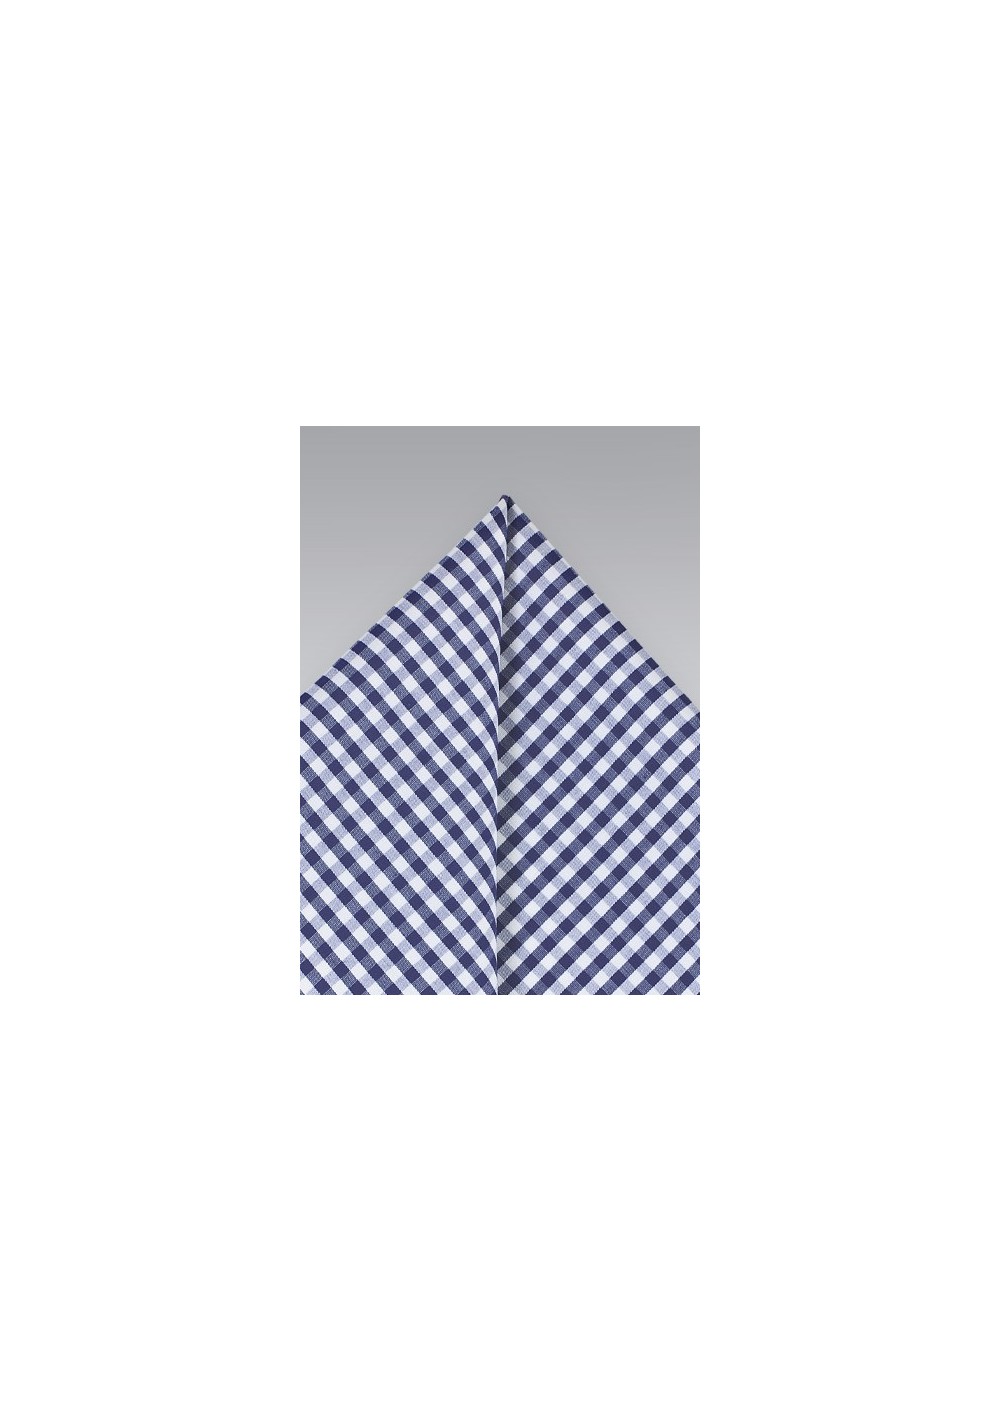 Cotton Gingham Pocket Square in Navy